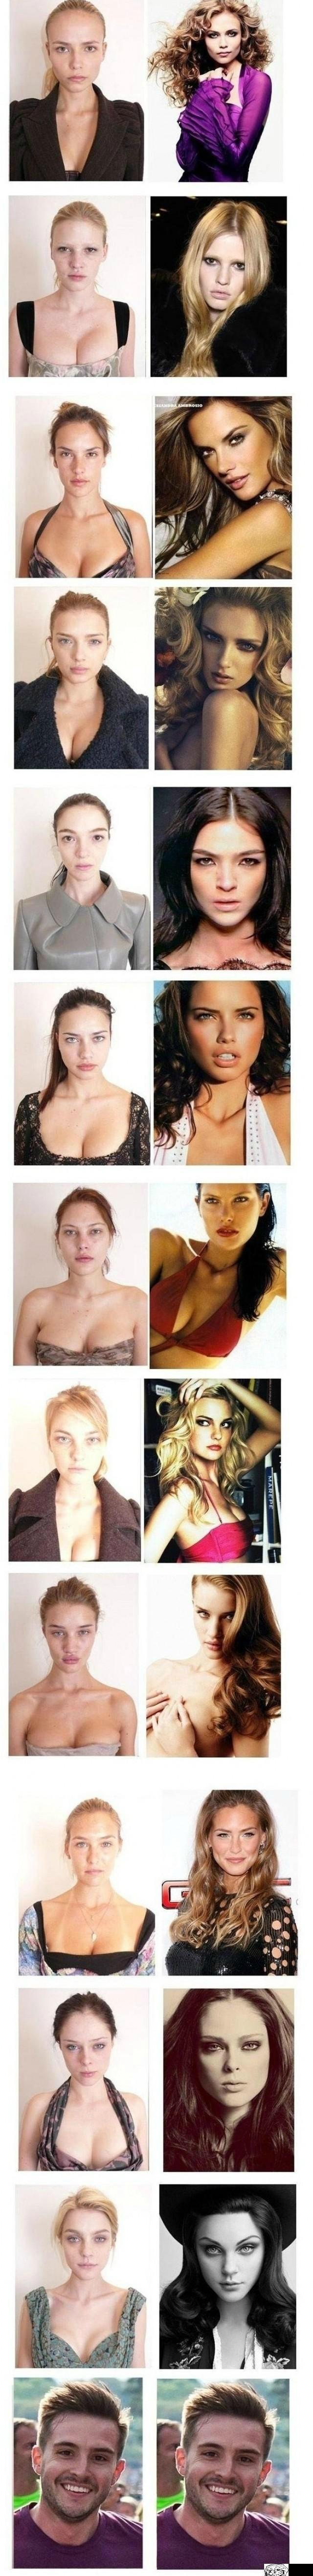 Supermodels without make-up... wait for it -   Misc